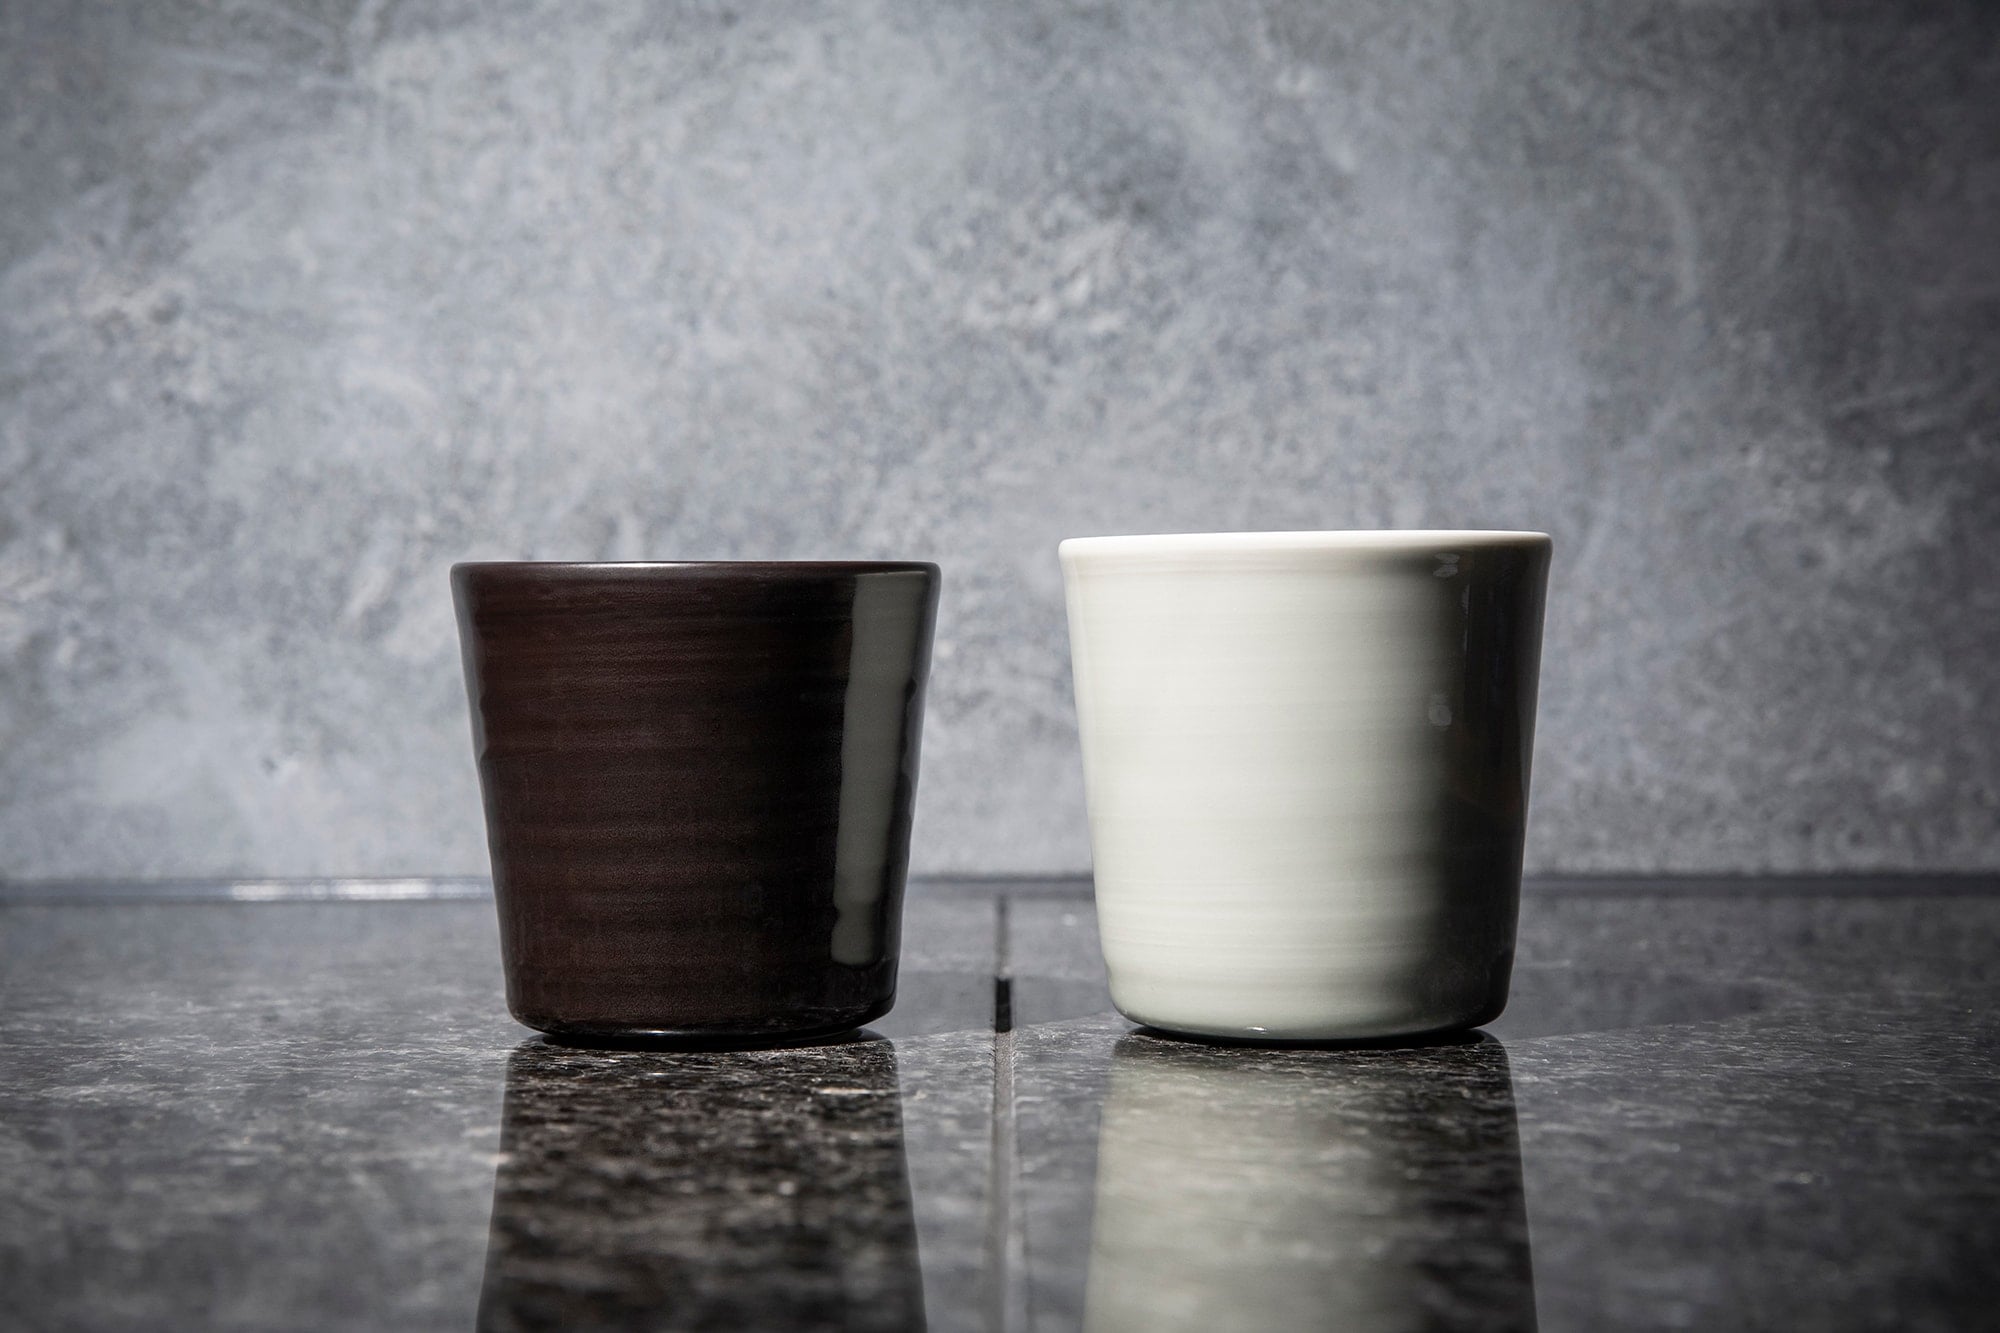 The porcelain cup is a collaboration work by Ingegerd Raman and Koransha from Arita.